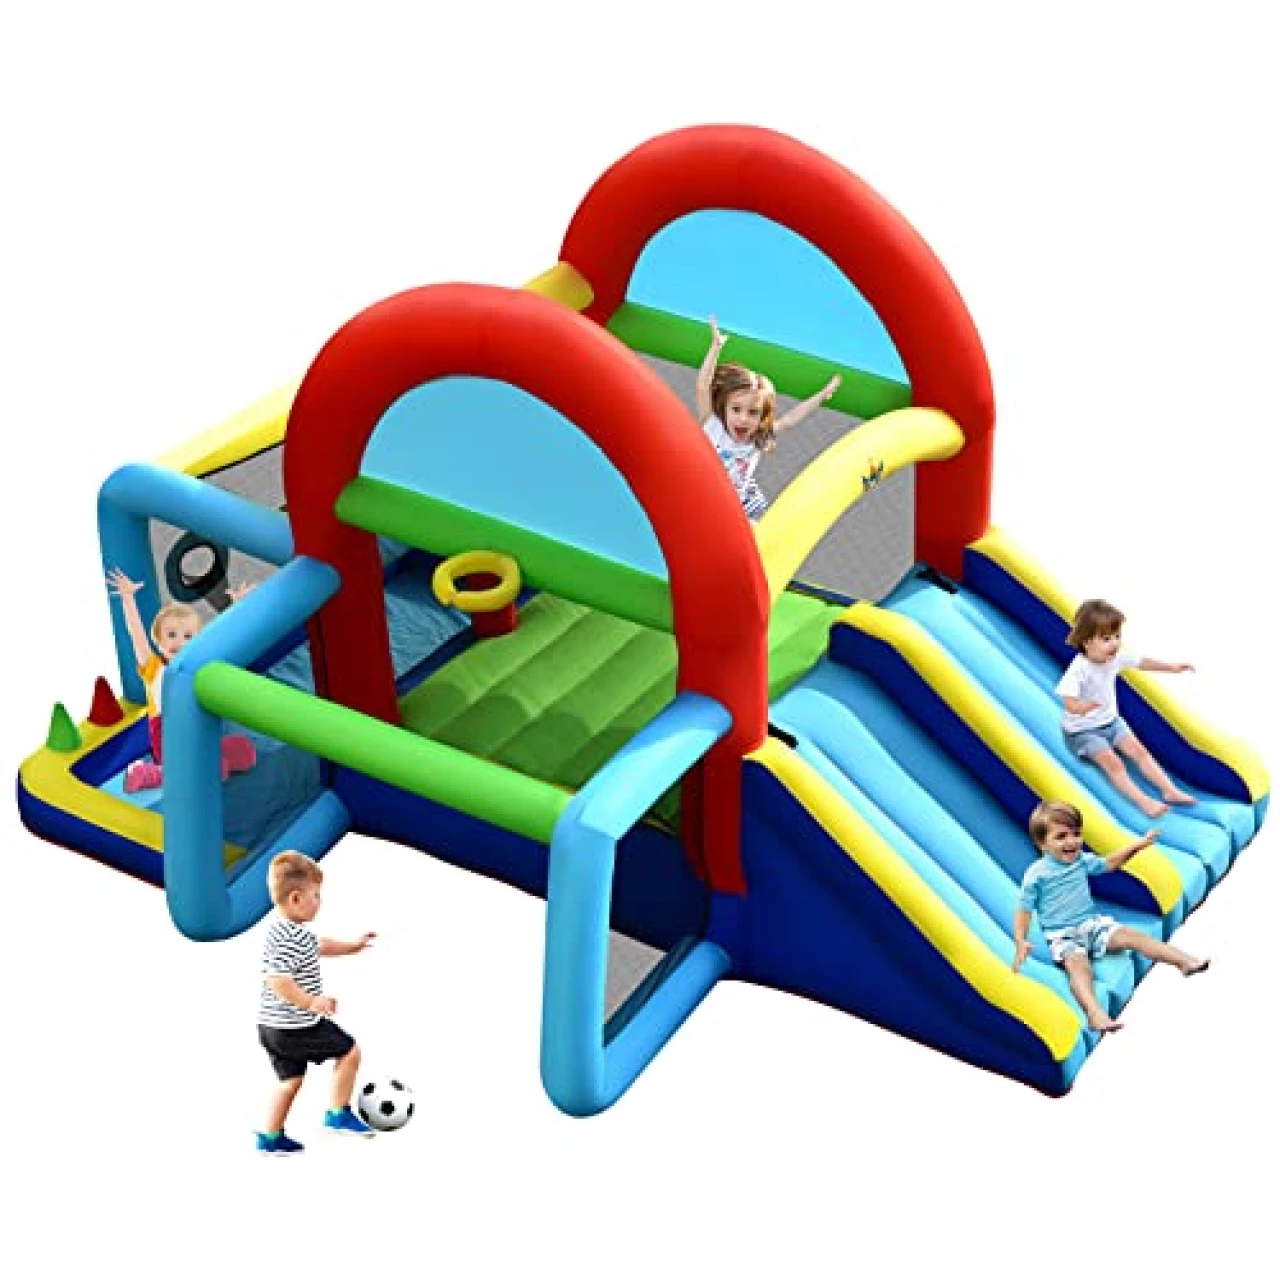 BOUNTECH 8 in 1 Inflatable Bounce House